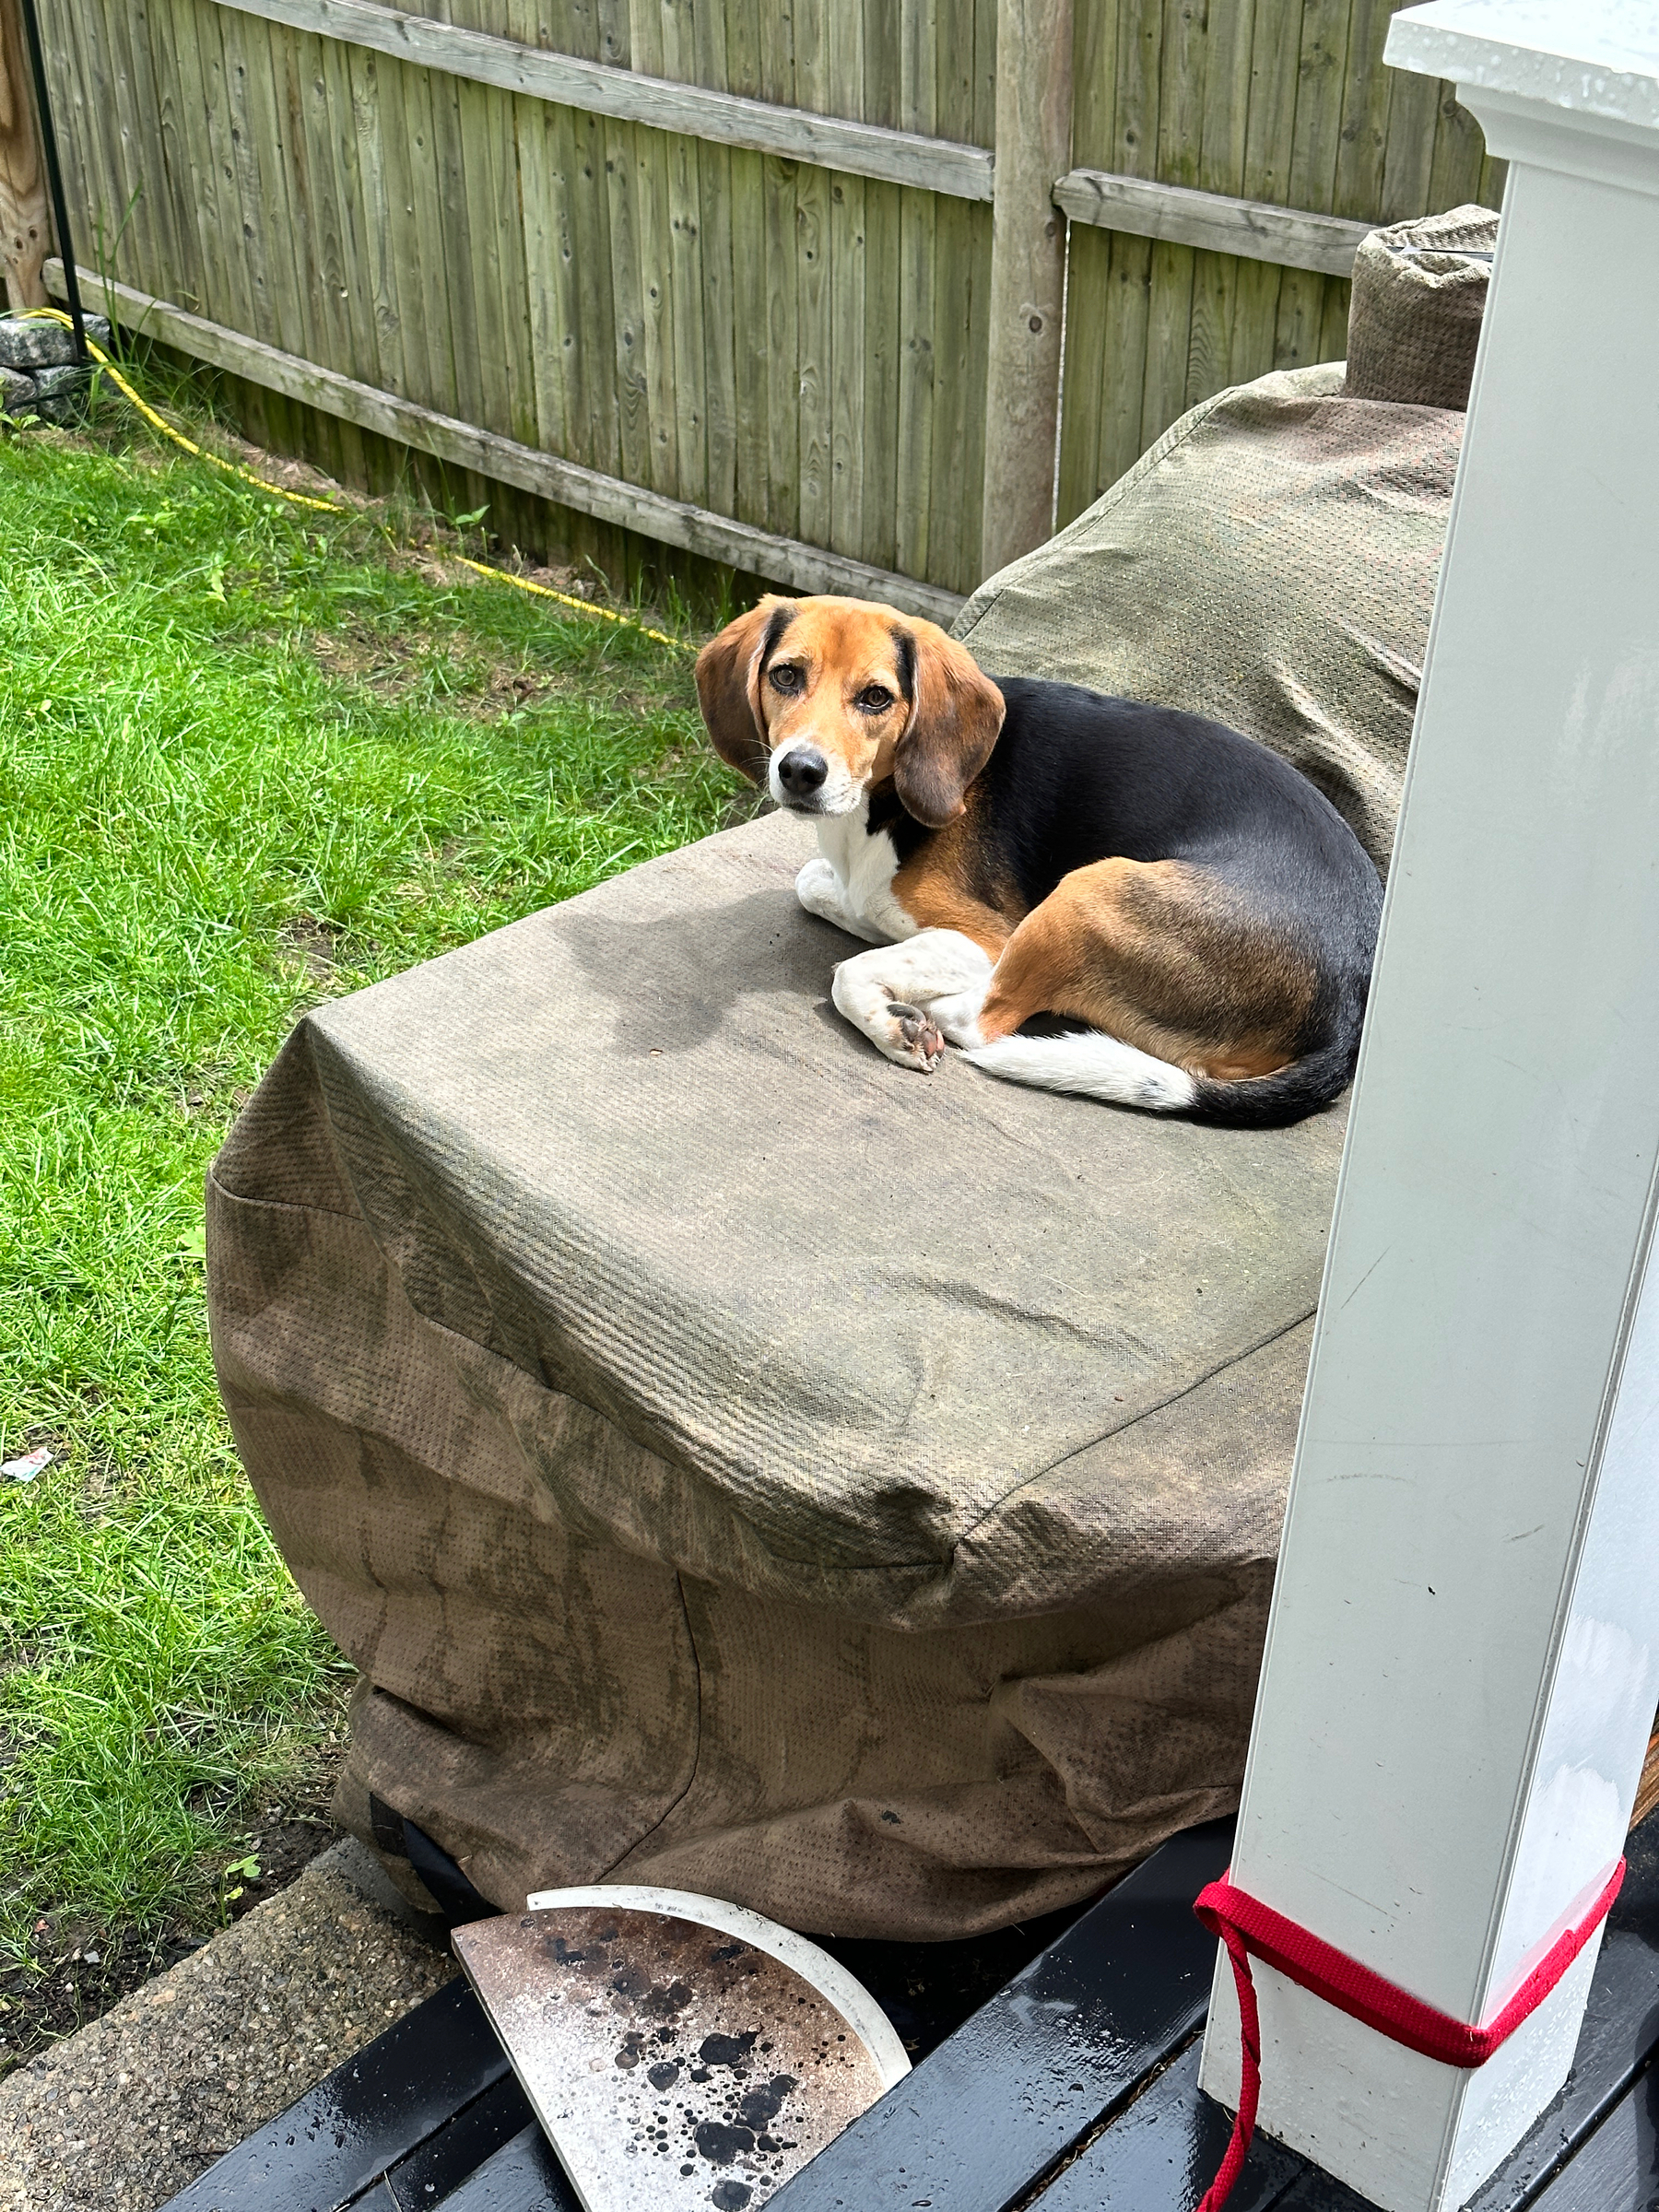 Molly the tri-colored beagle curled up on the grill table looking forlorn. 